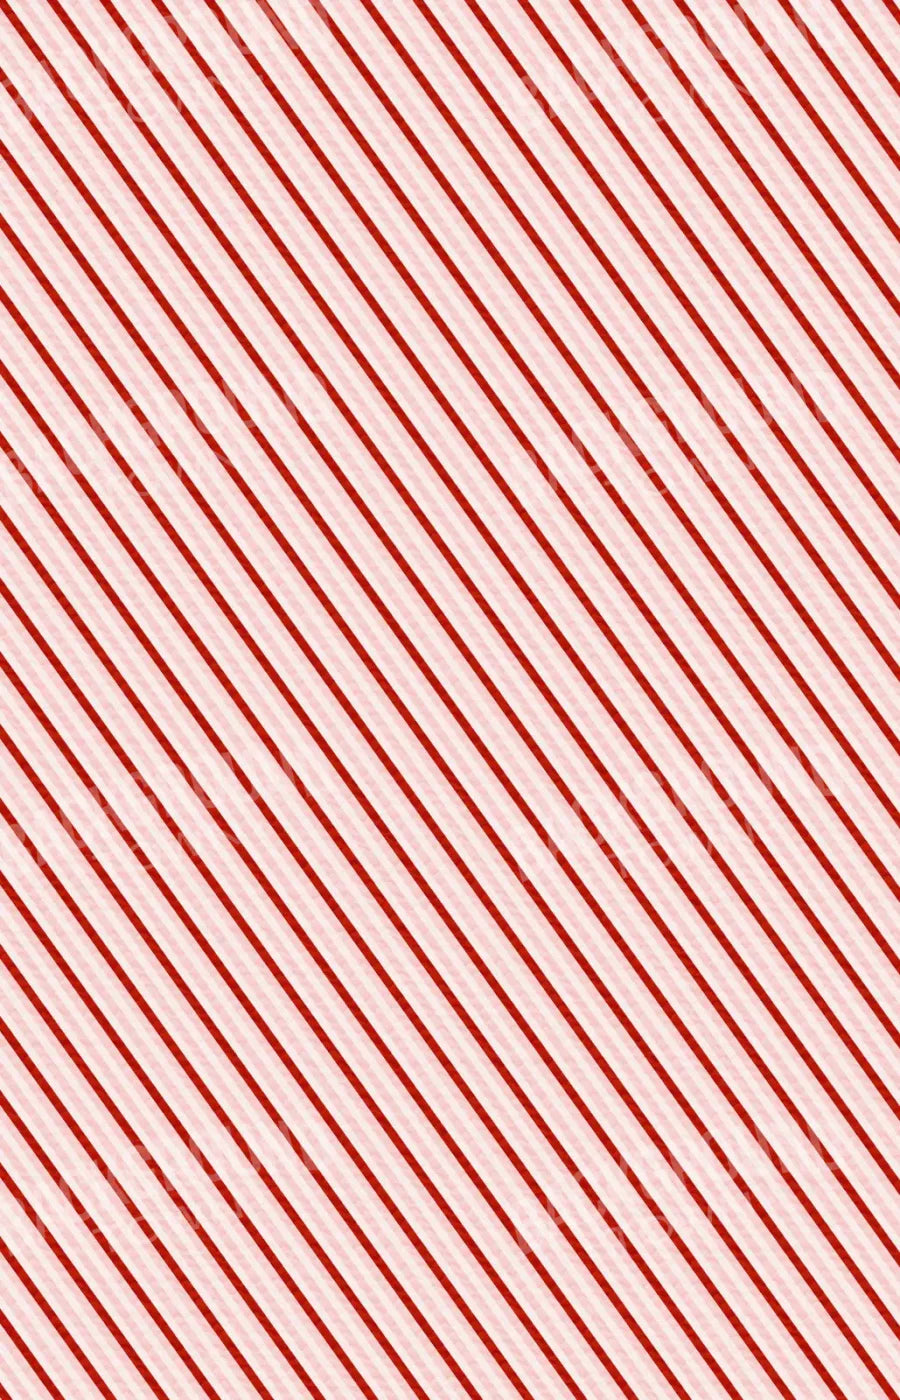 Candy Cane 8X12 Ultracloth ( 96 X 144 Inch ) Backdrop